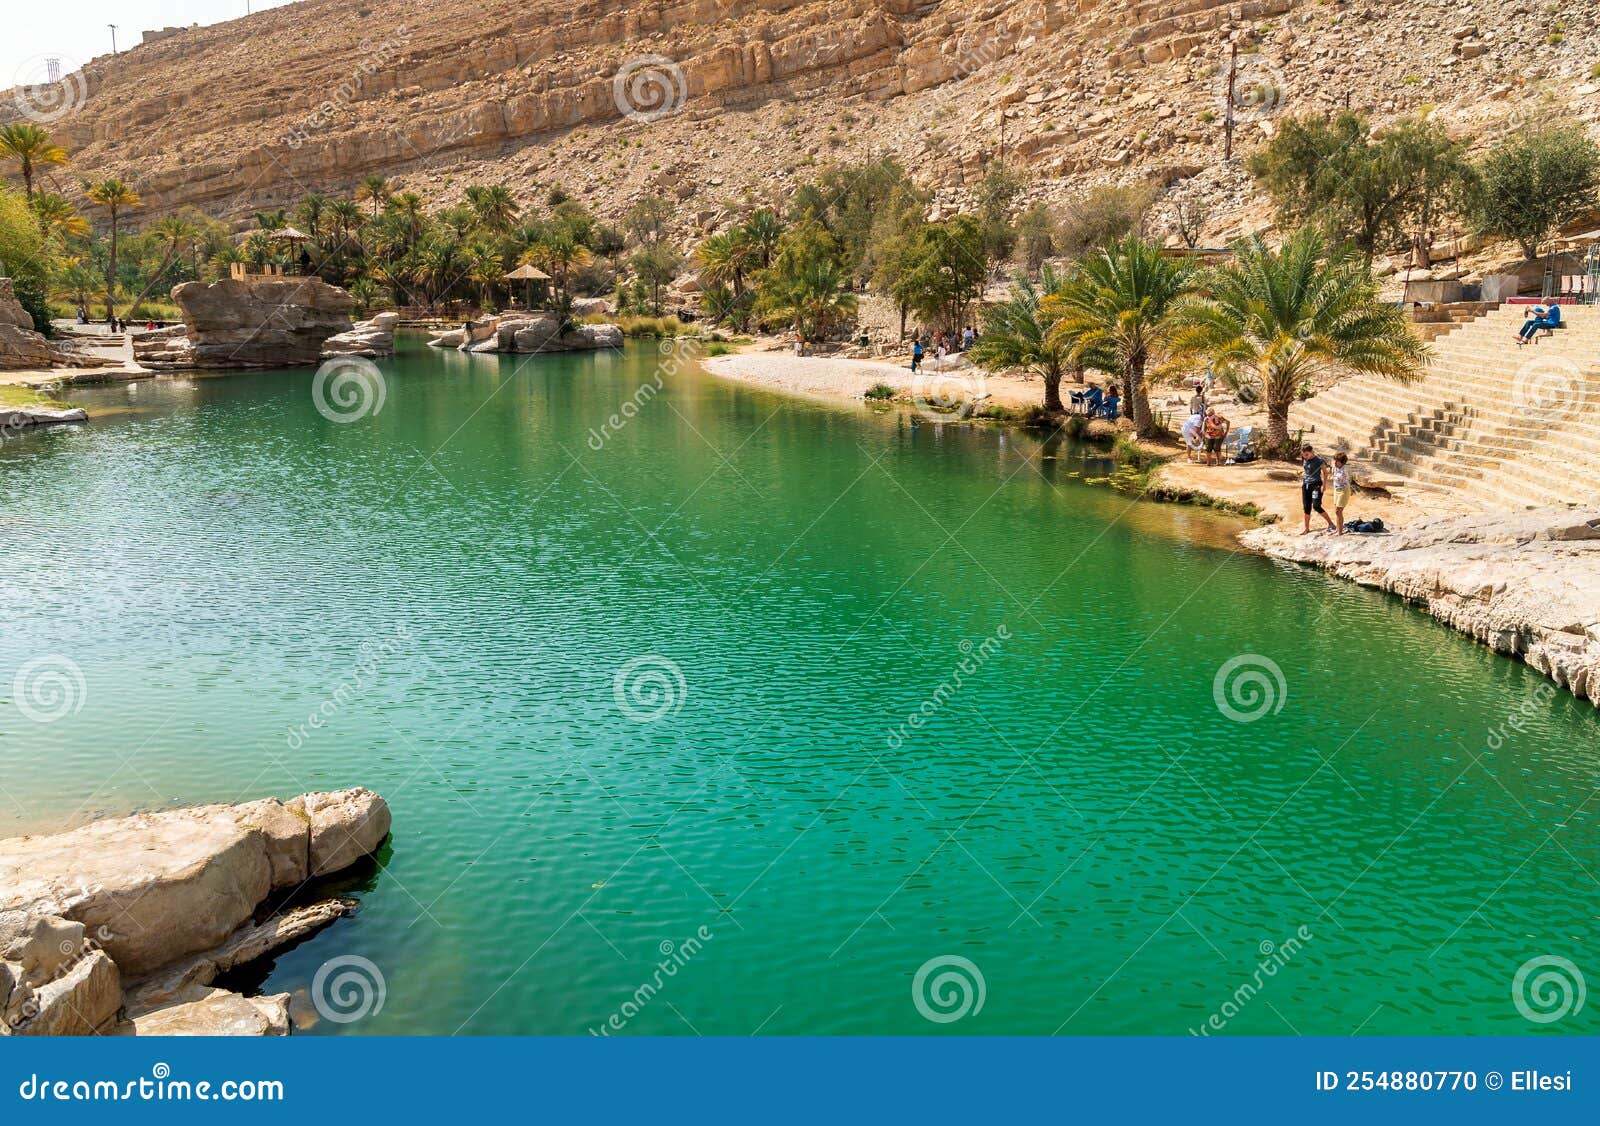 view of the wadi bani khalid oasis in the desert in sultanate of oman